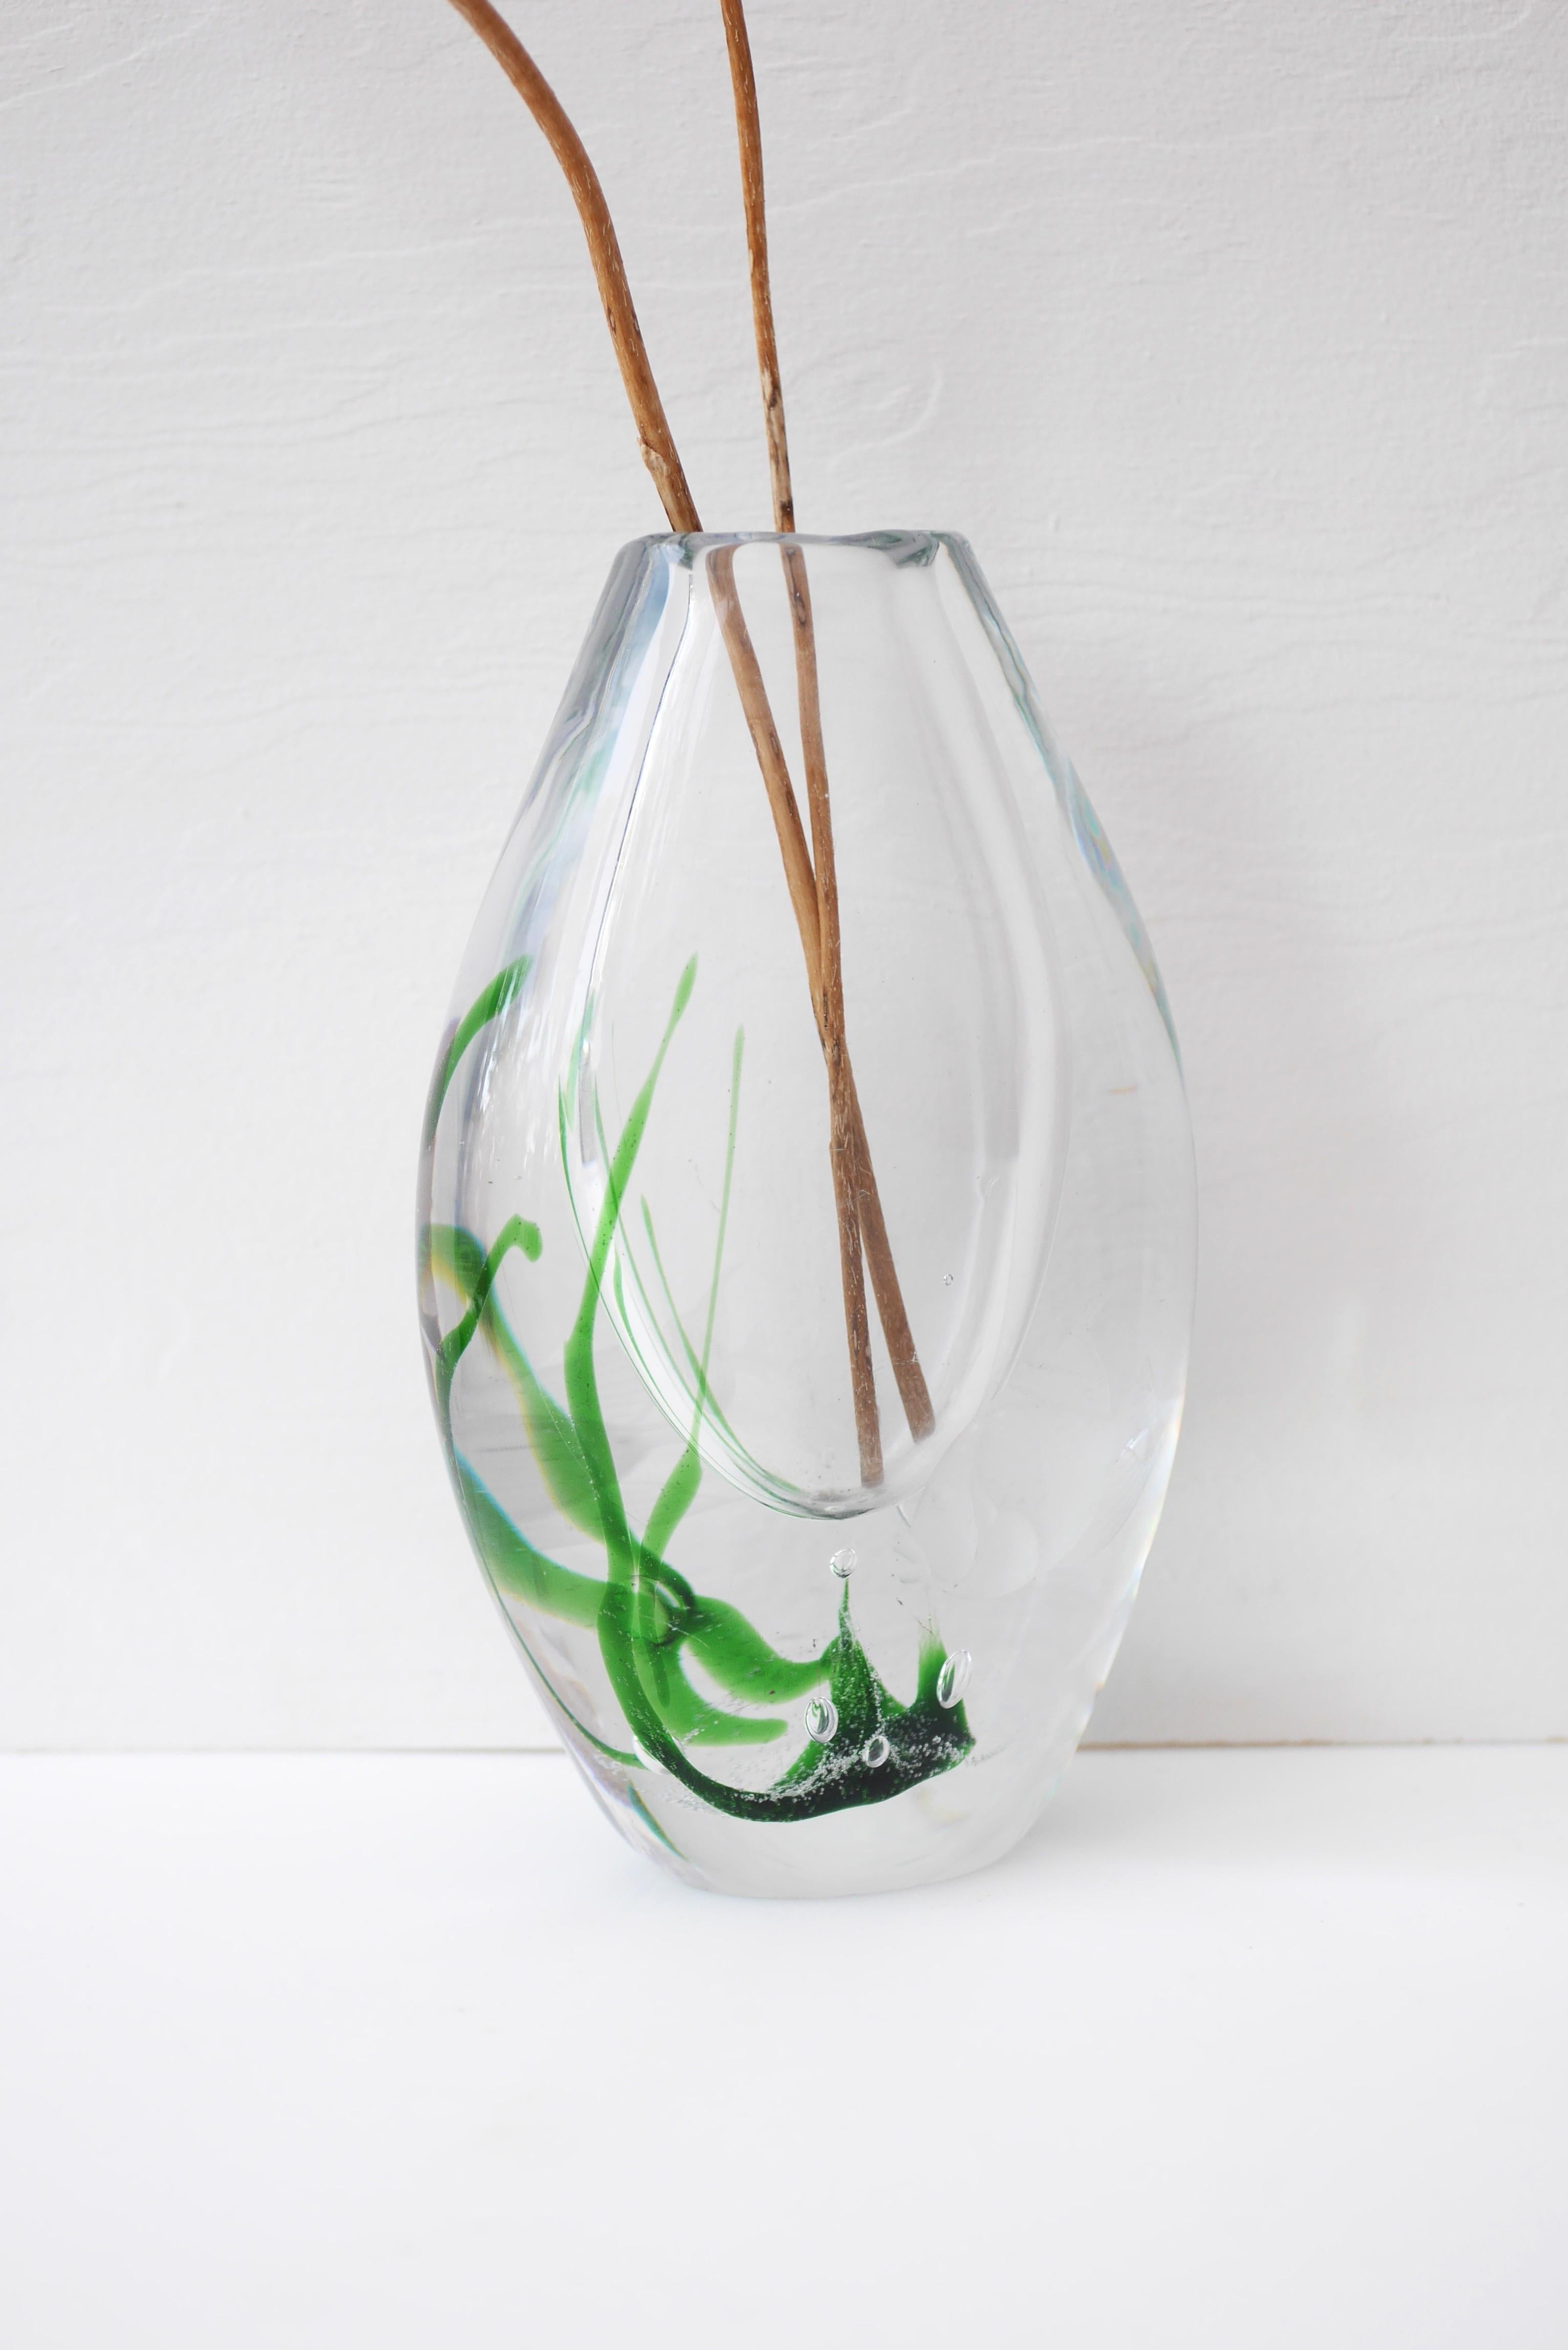 Art Glass Mid-century modern seaweed and fish vase made by Vicke Lindstrand Kosta, Sweden For Sale